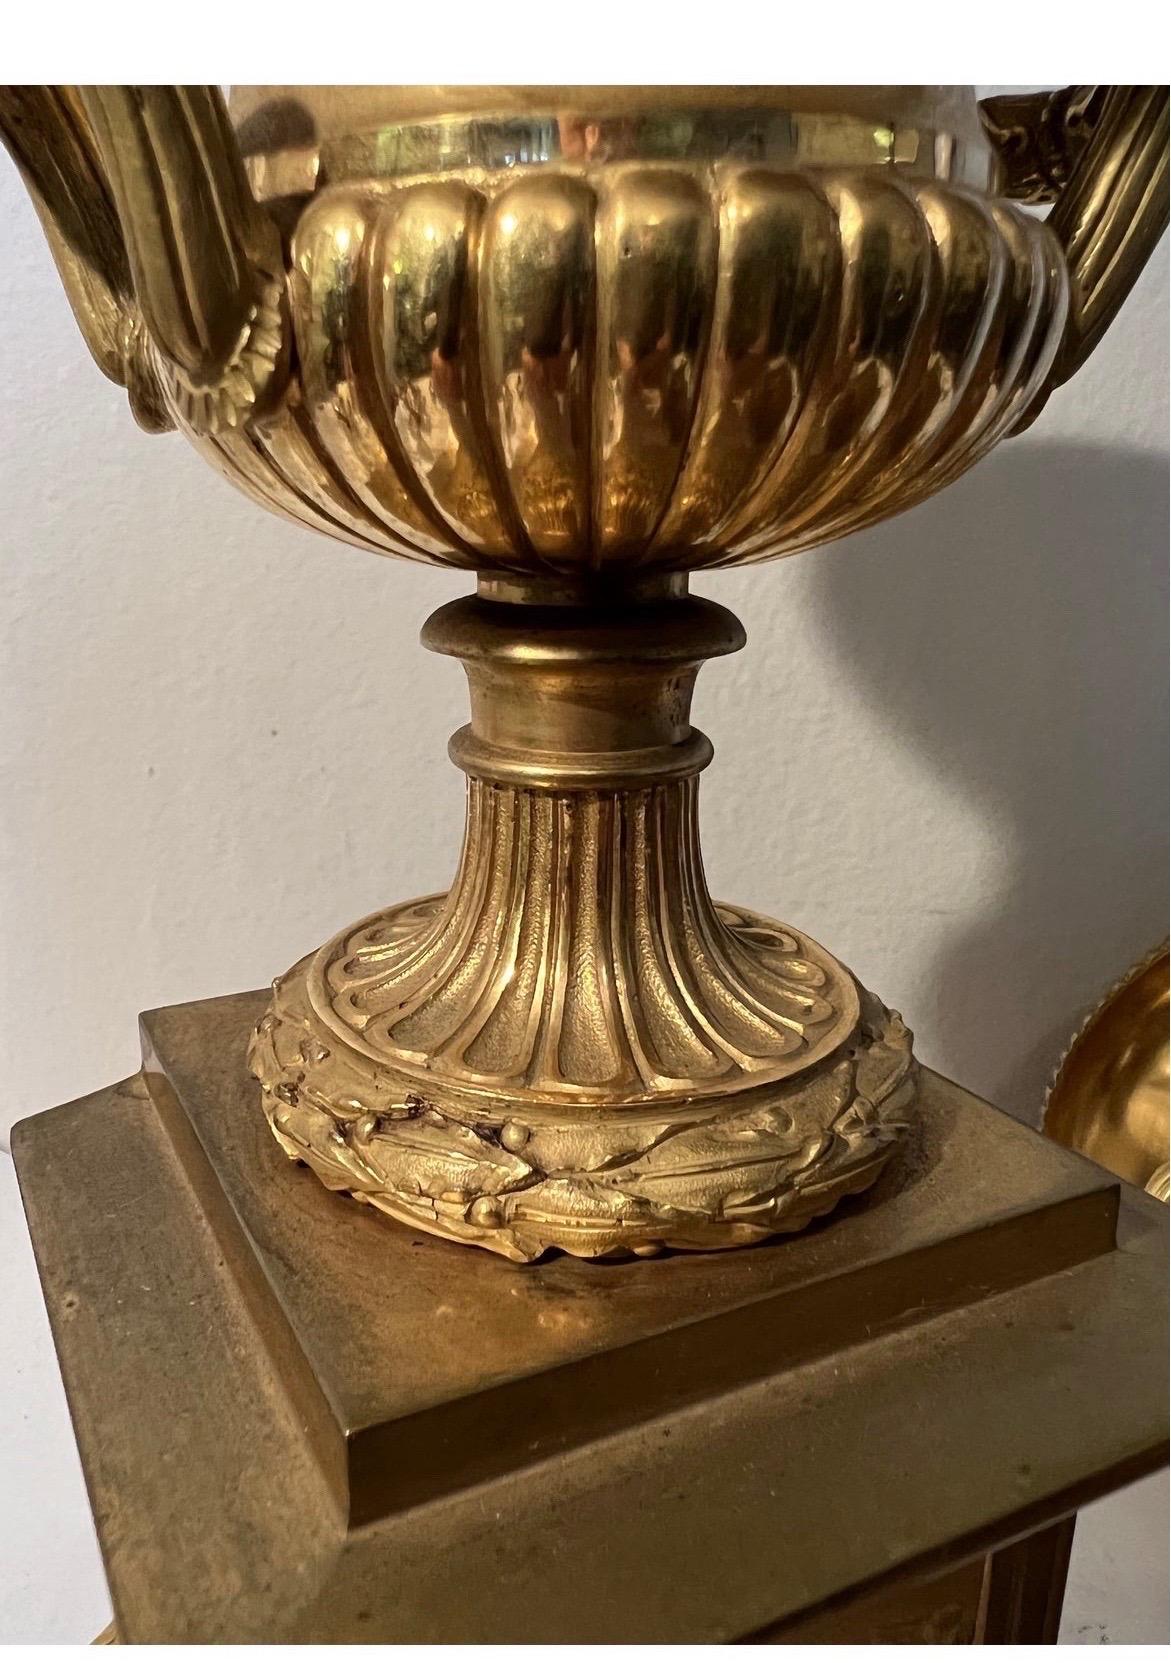 19th Century Neoclassical Gilt Bronze Grand Tour Mounted Urns, a Pair For Sale 8